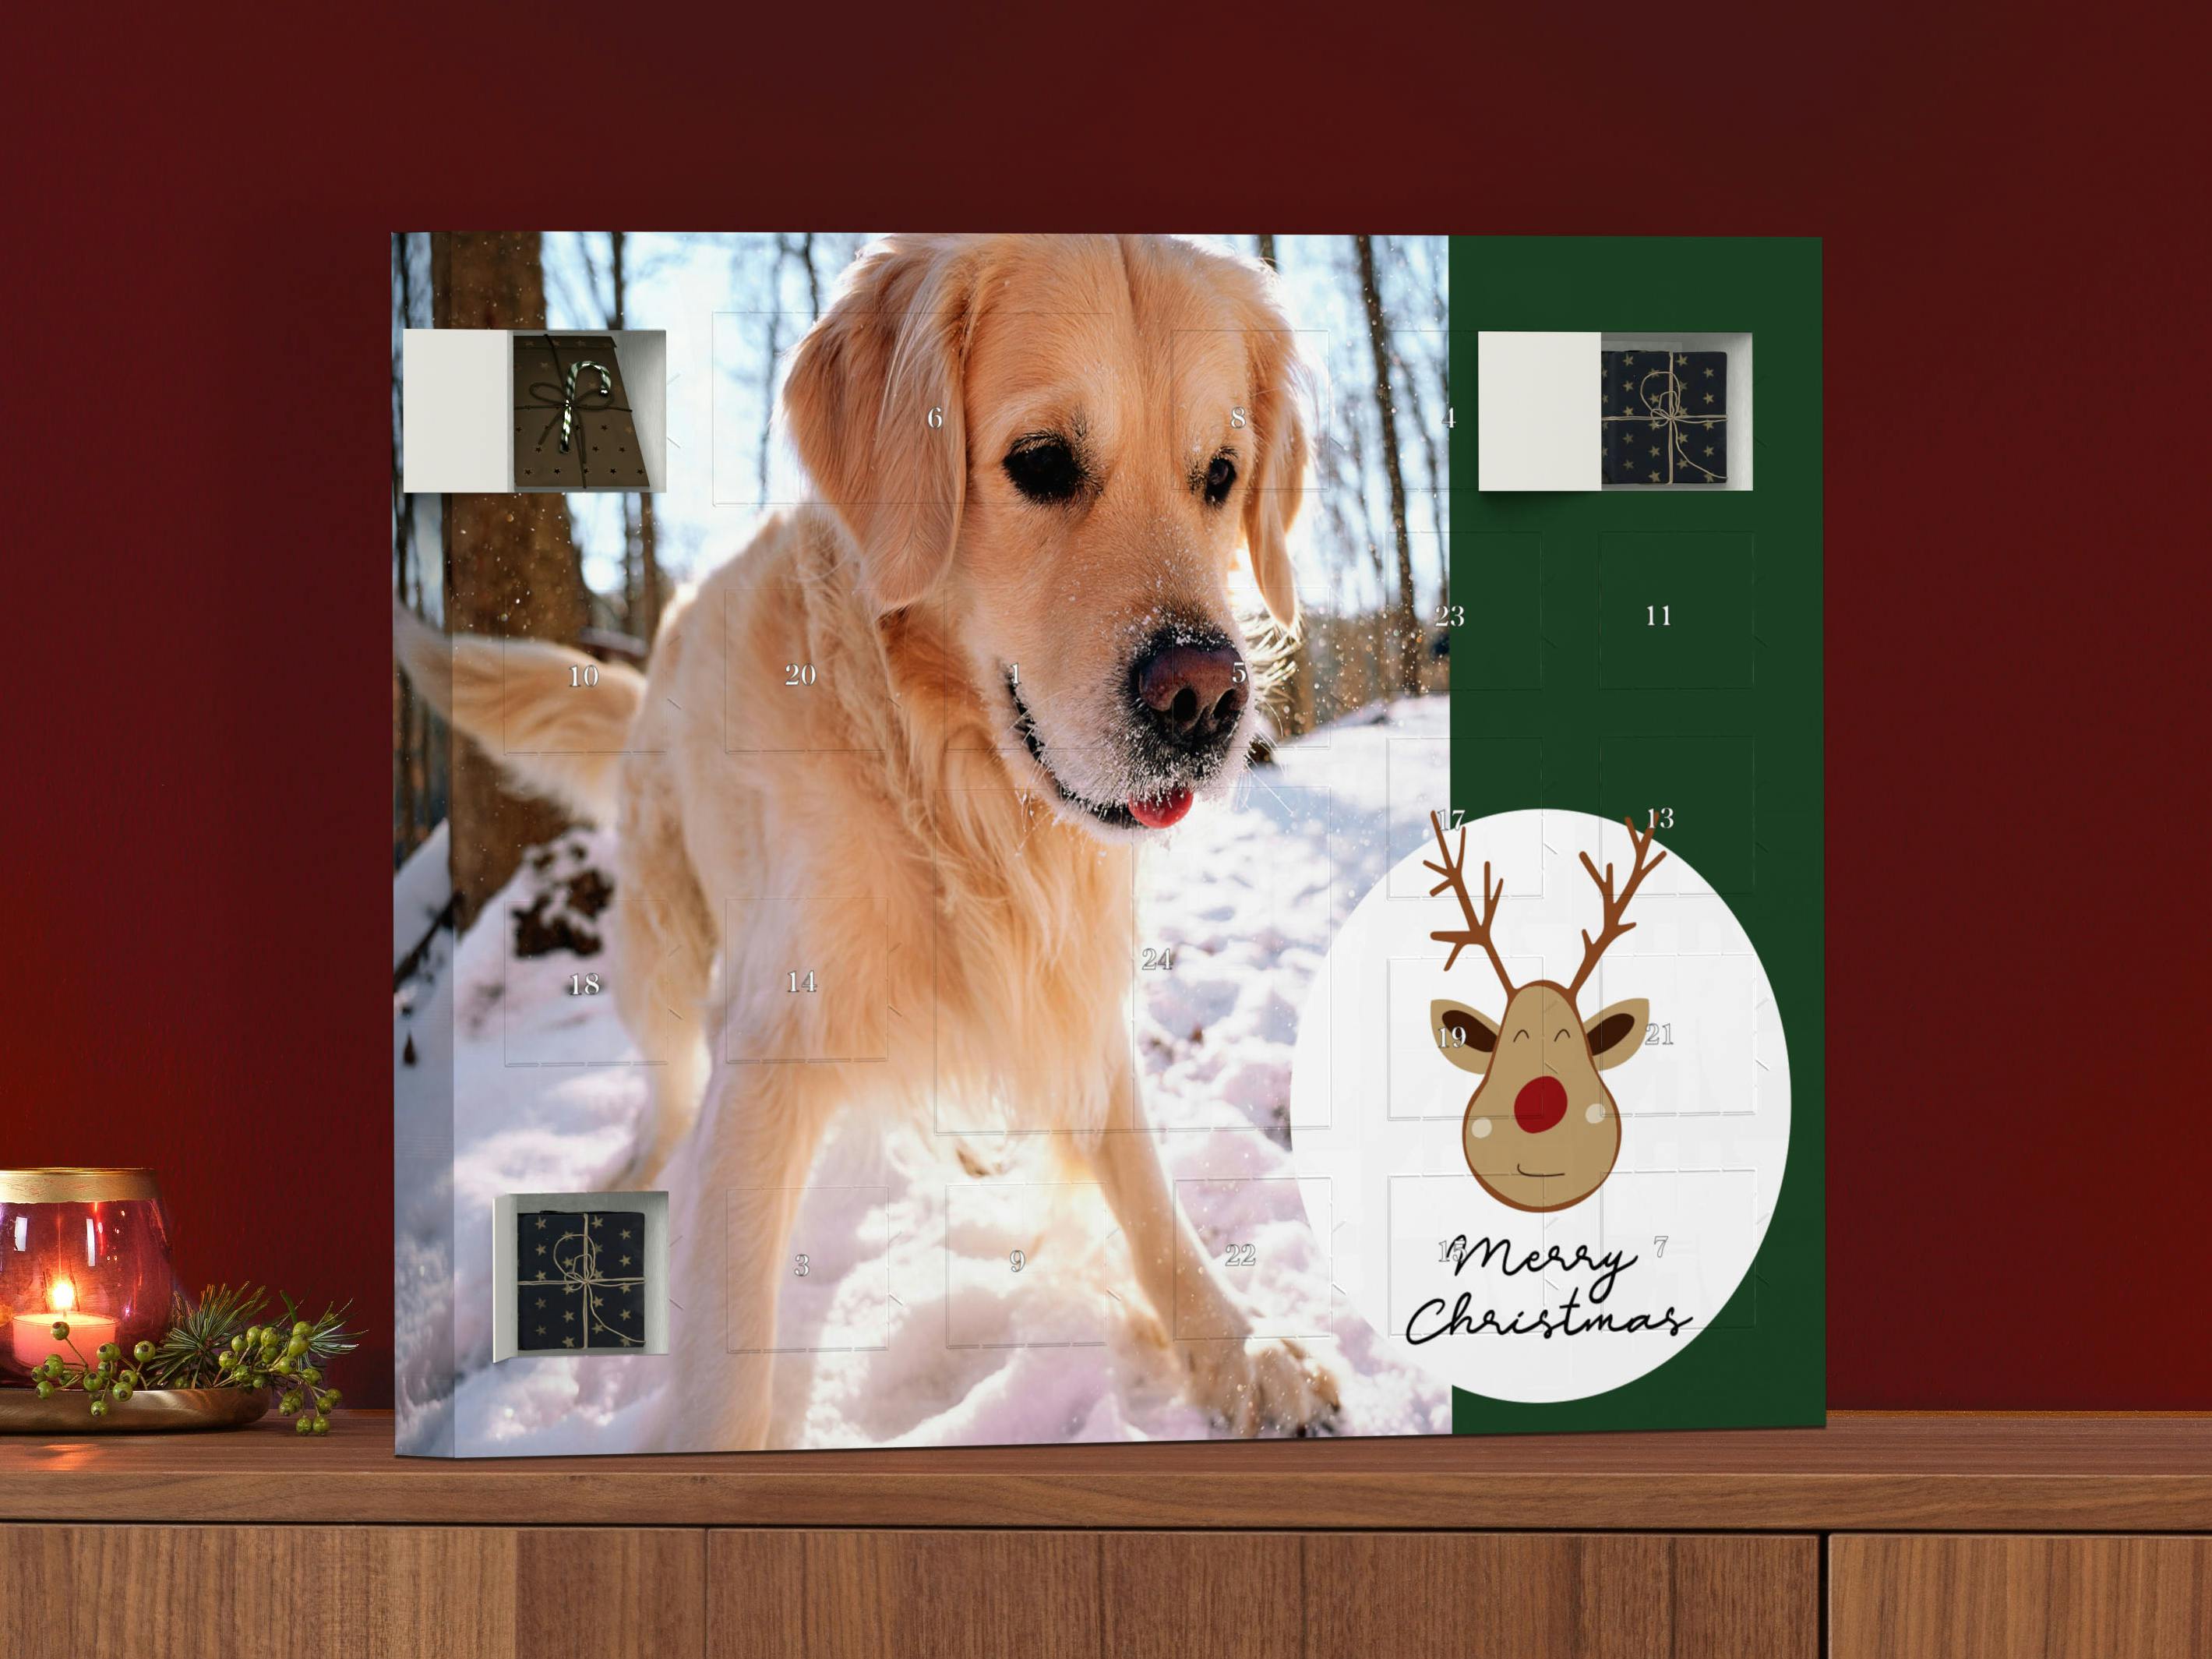 Photo Advent Calendar to fill yourself in landsccape format wit an image of a dog in a Christmas setting